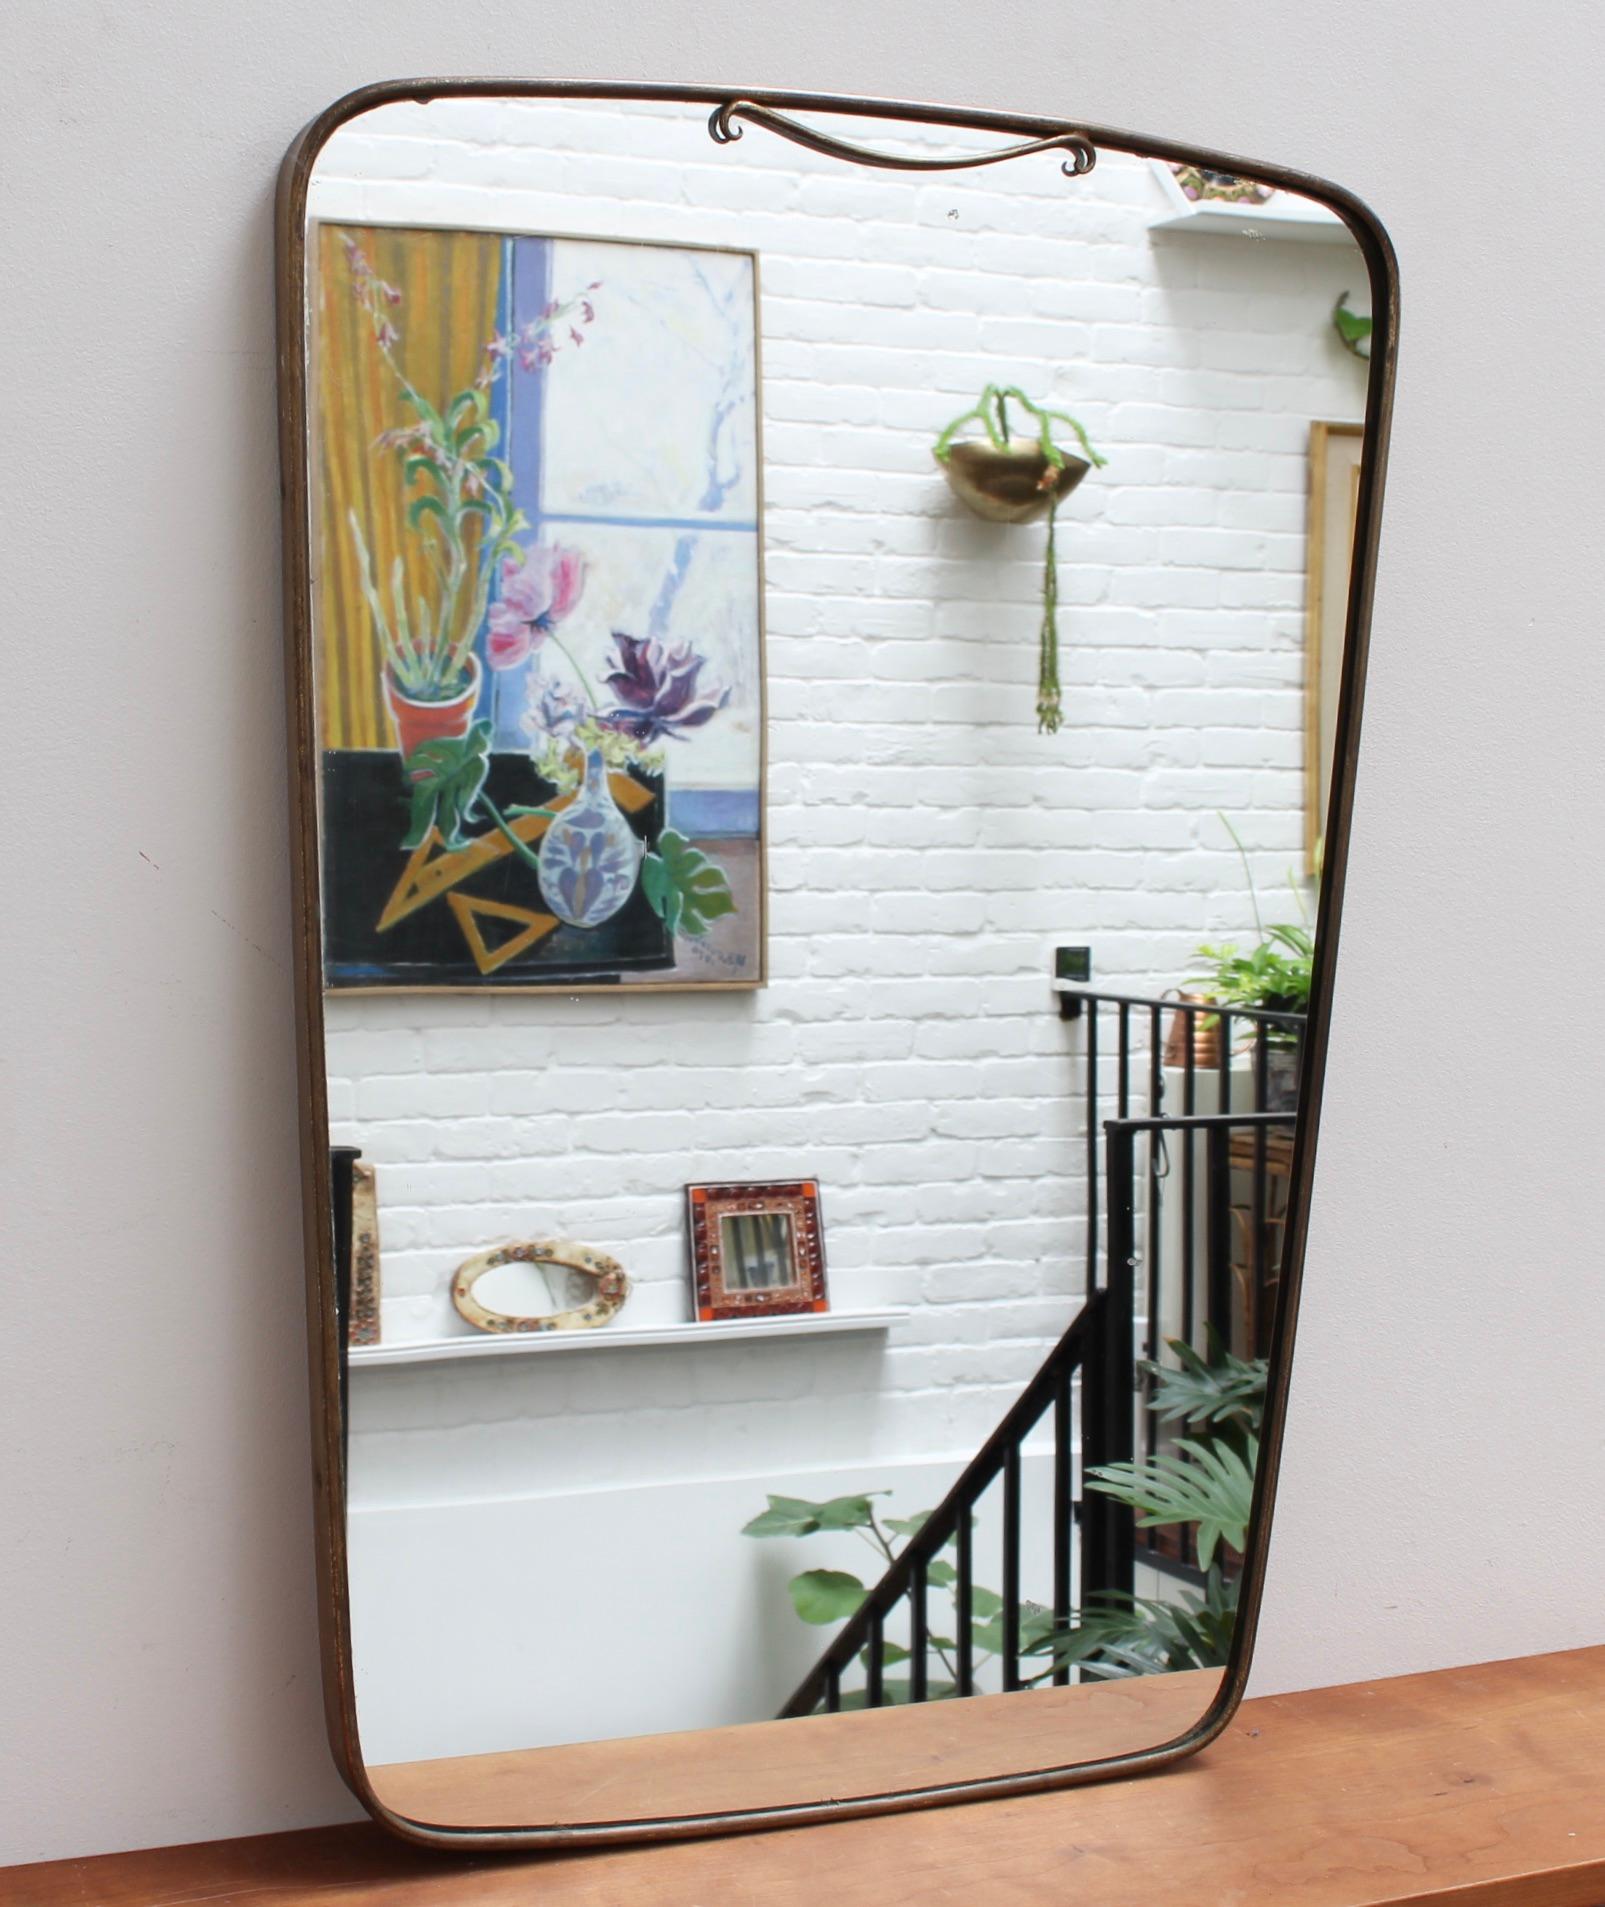 Midcentury Italian wall mirror with brass frame and flourish (circa 1950s). The mirror is rather large, unusually but beautifully-shaped, somewhat like a slice of white bread. It is classically elegant in a modern Gio Ponti style. The mirror is in